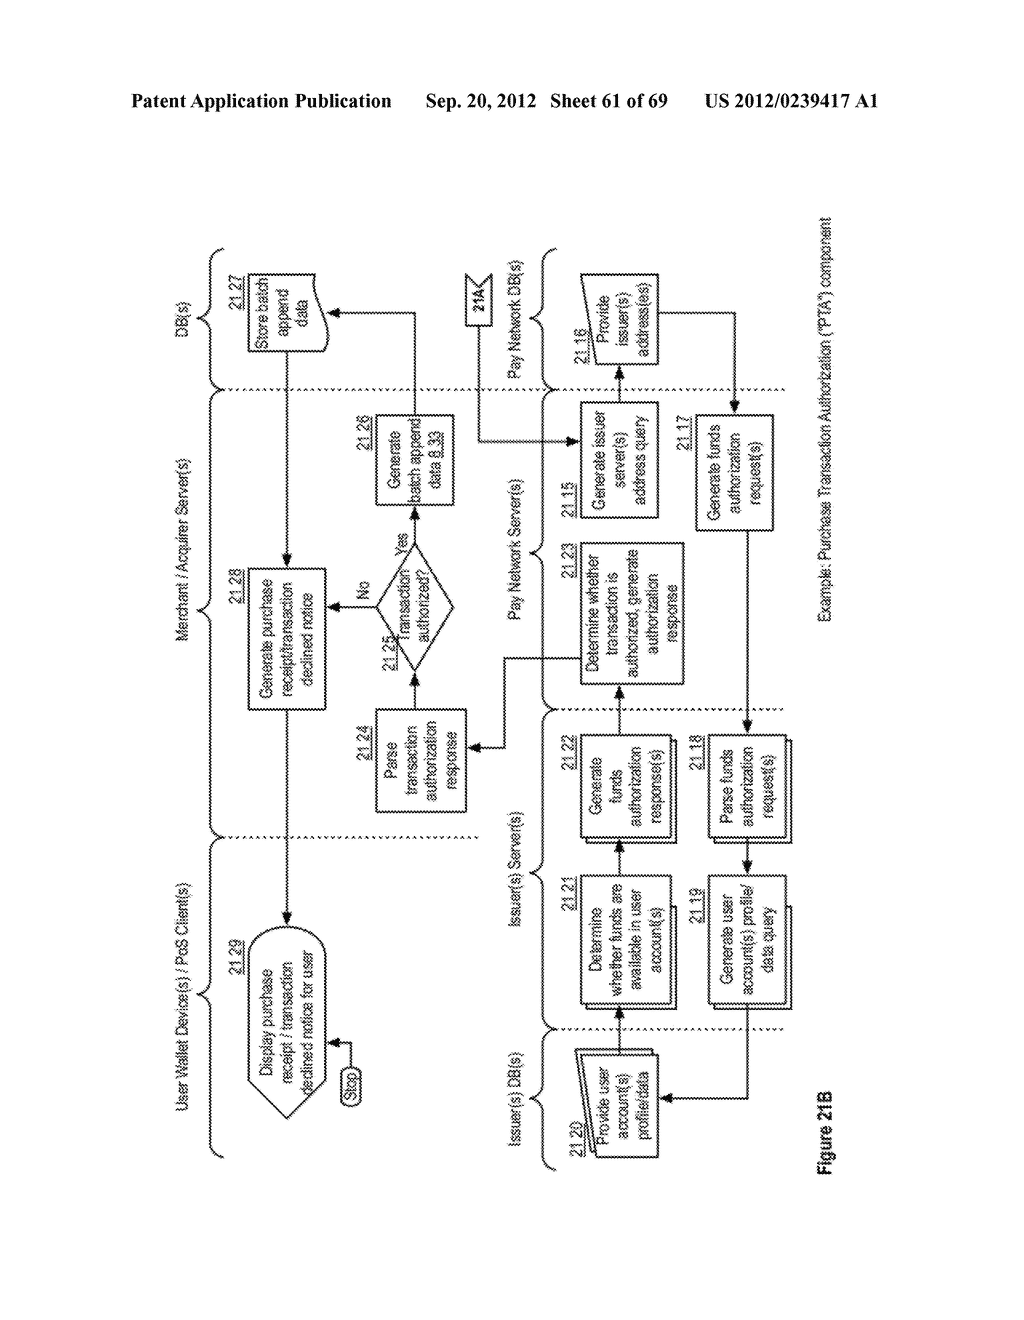 HEALTHCARE WALLET PAYMENT PROCESSING APPARATUSES, METHODS AND SYSTEMS - diagram, schematic, and image 62